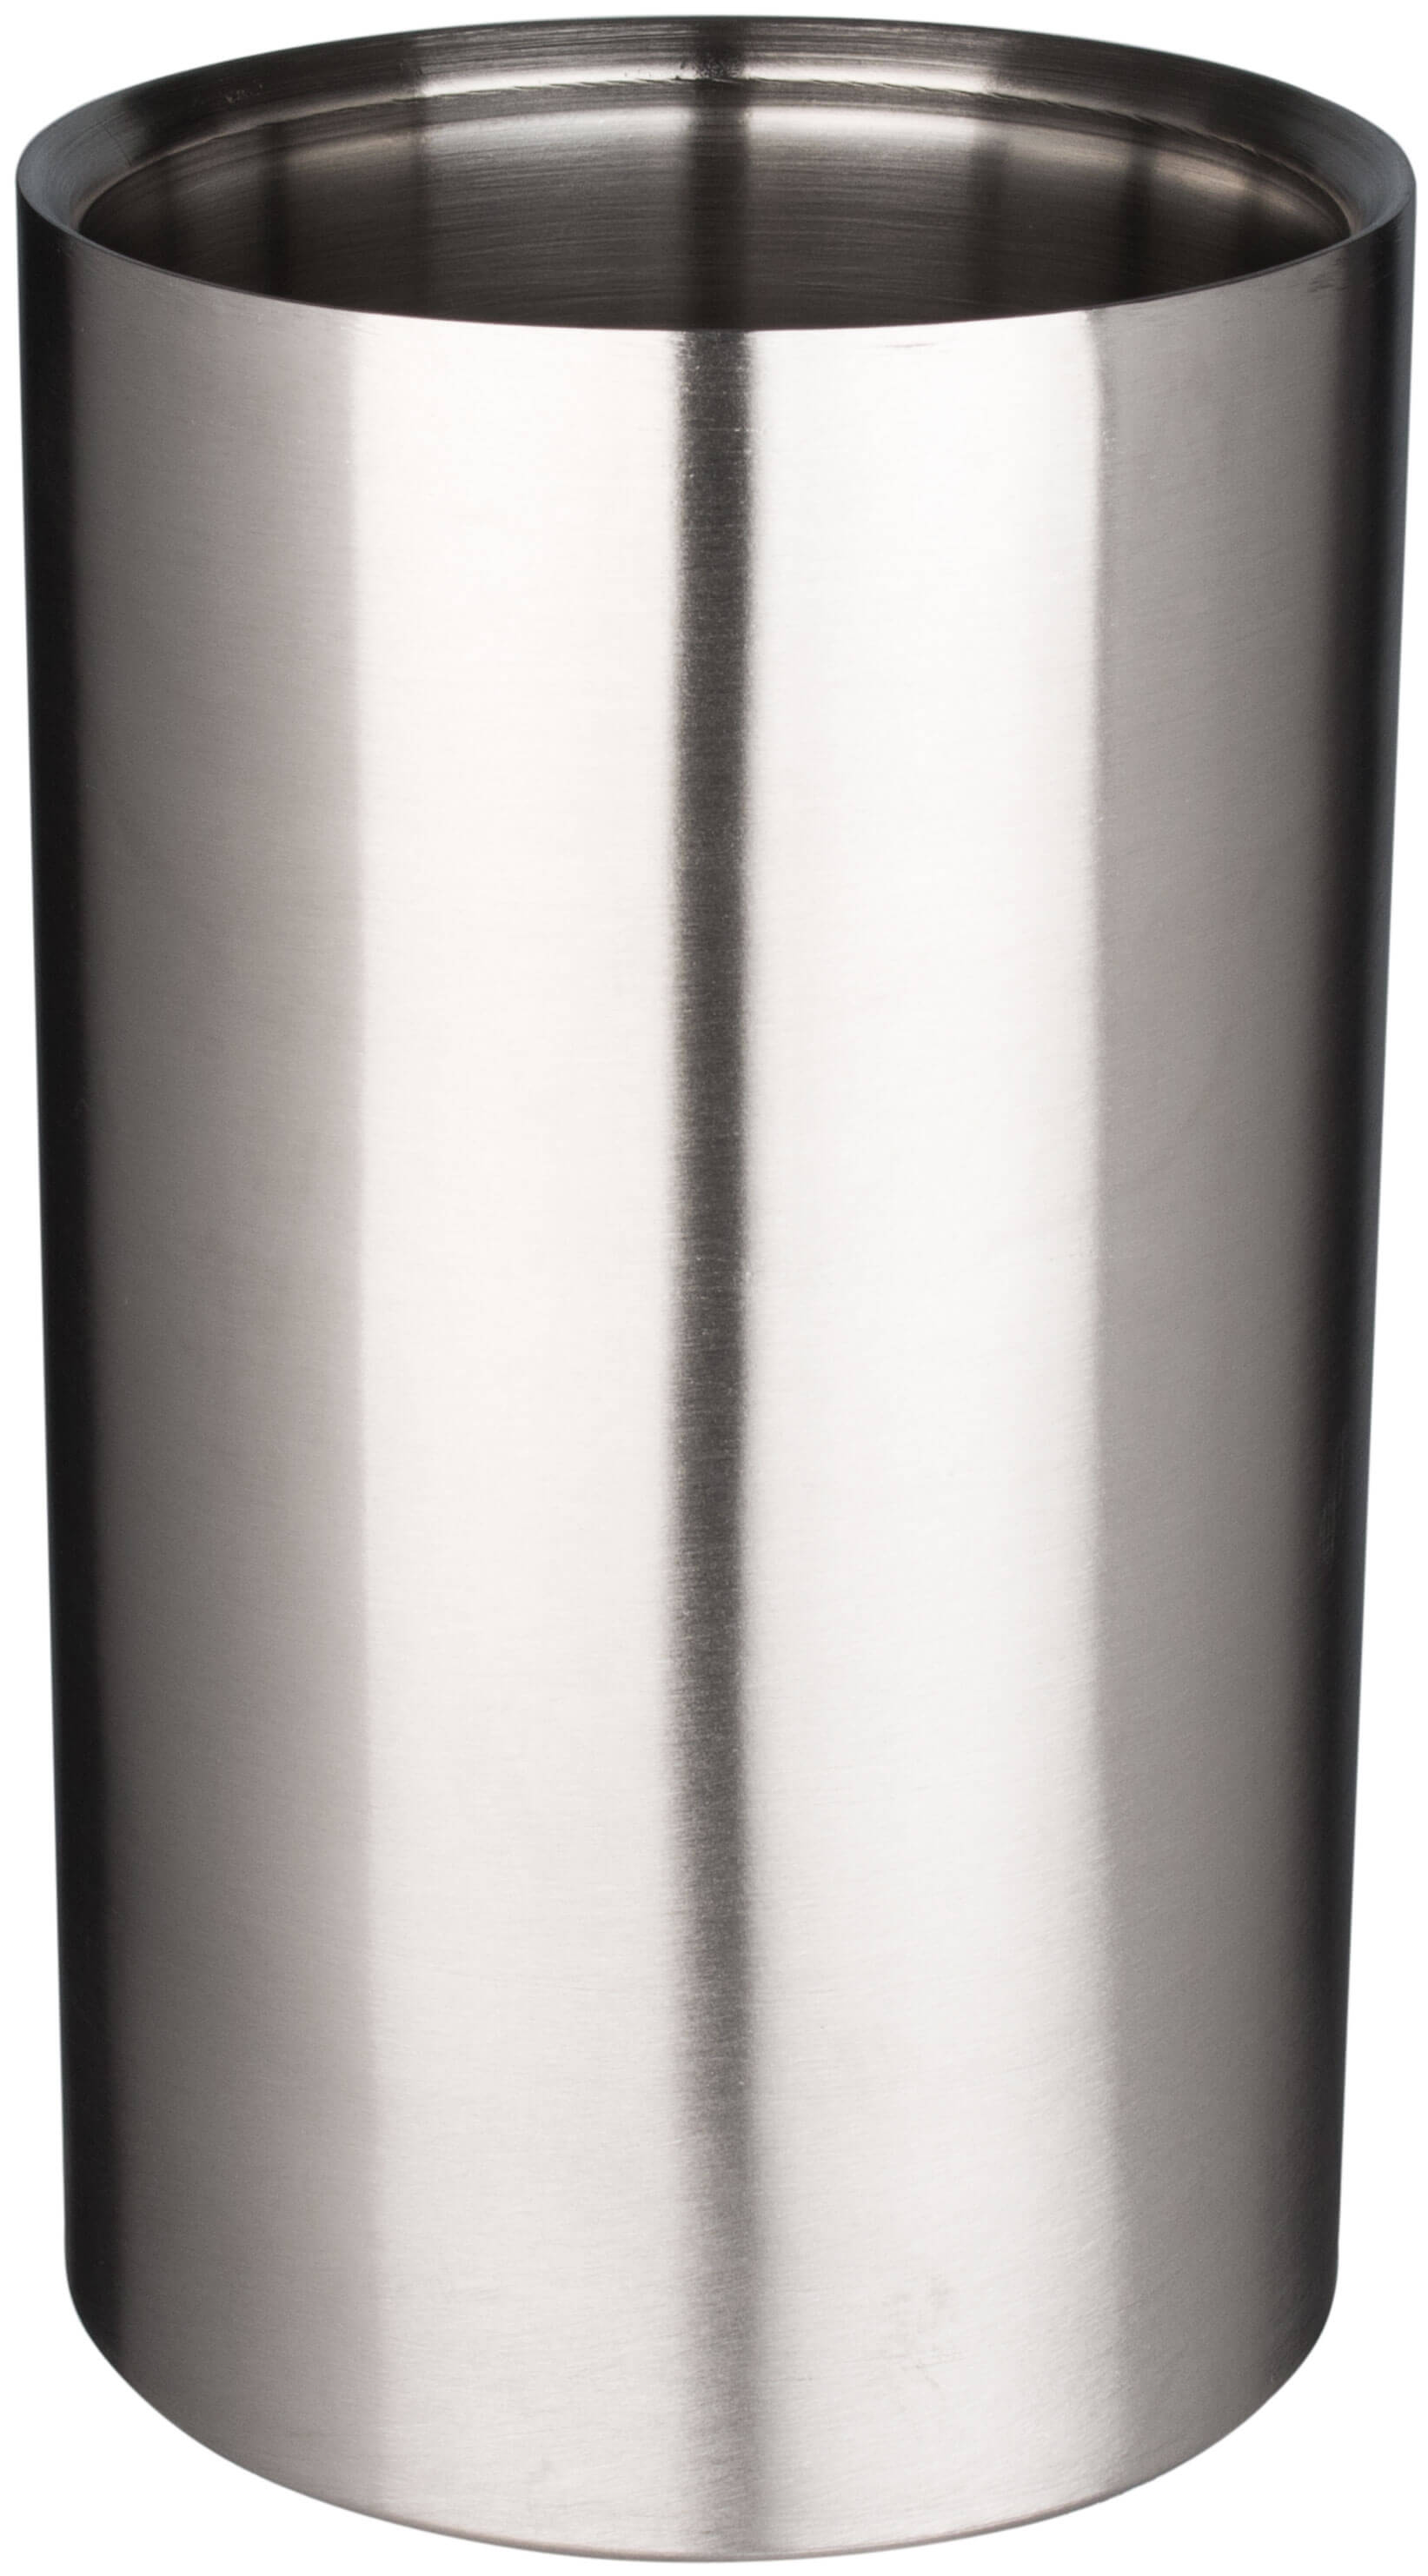 Thermo bottle cooler, stainless steel - 11,5cm